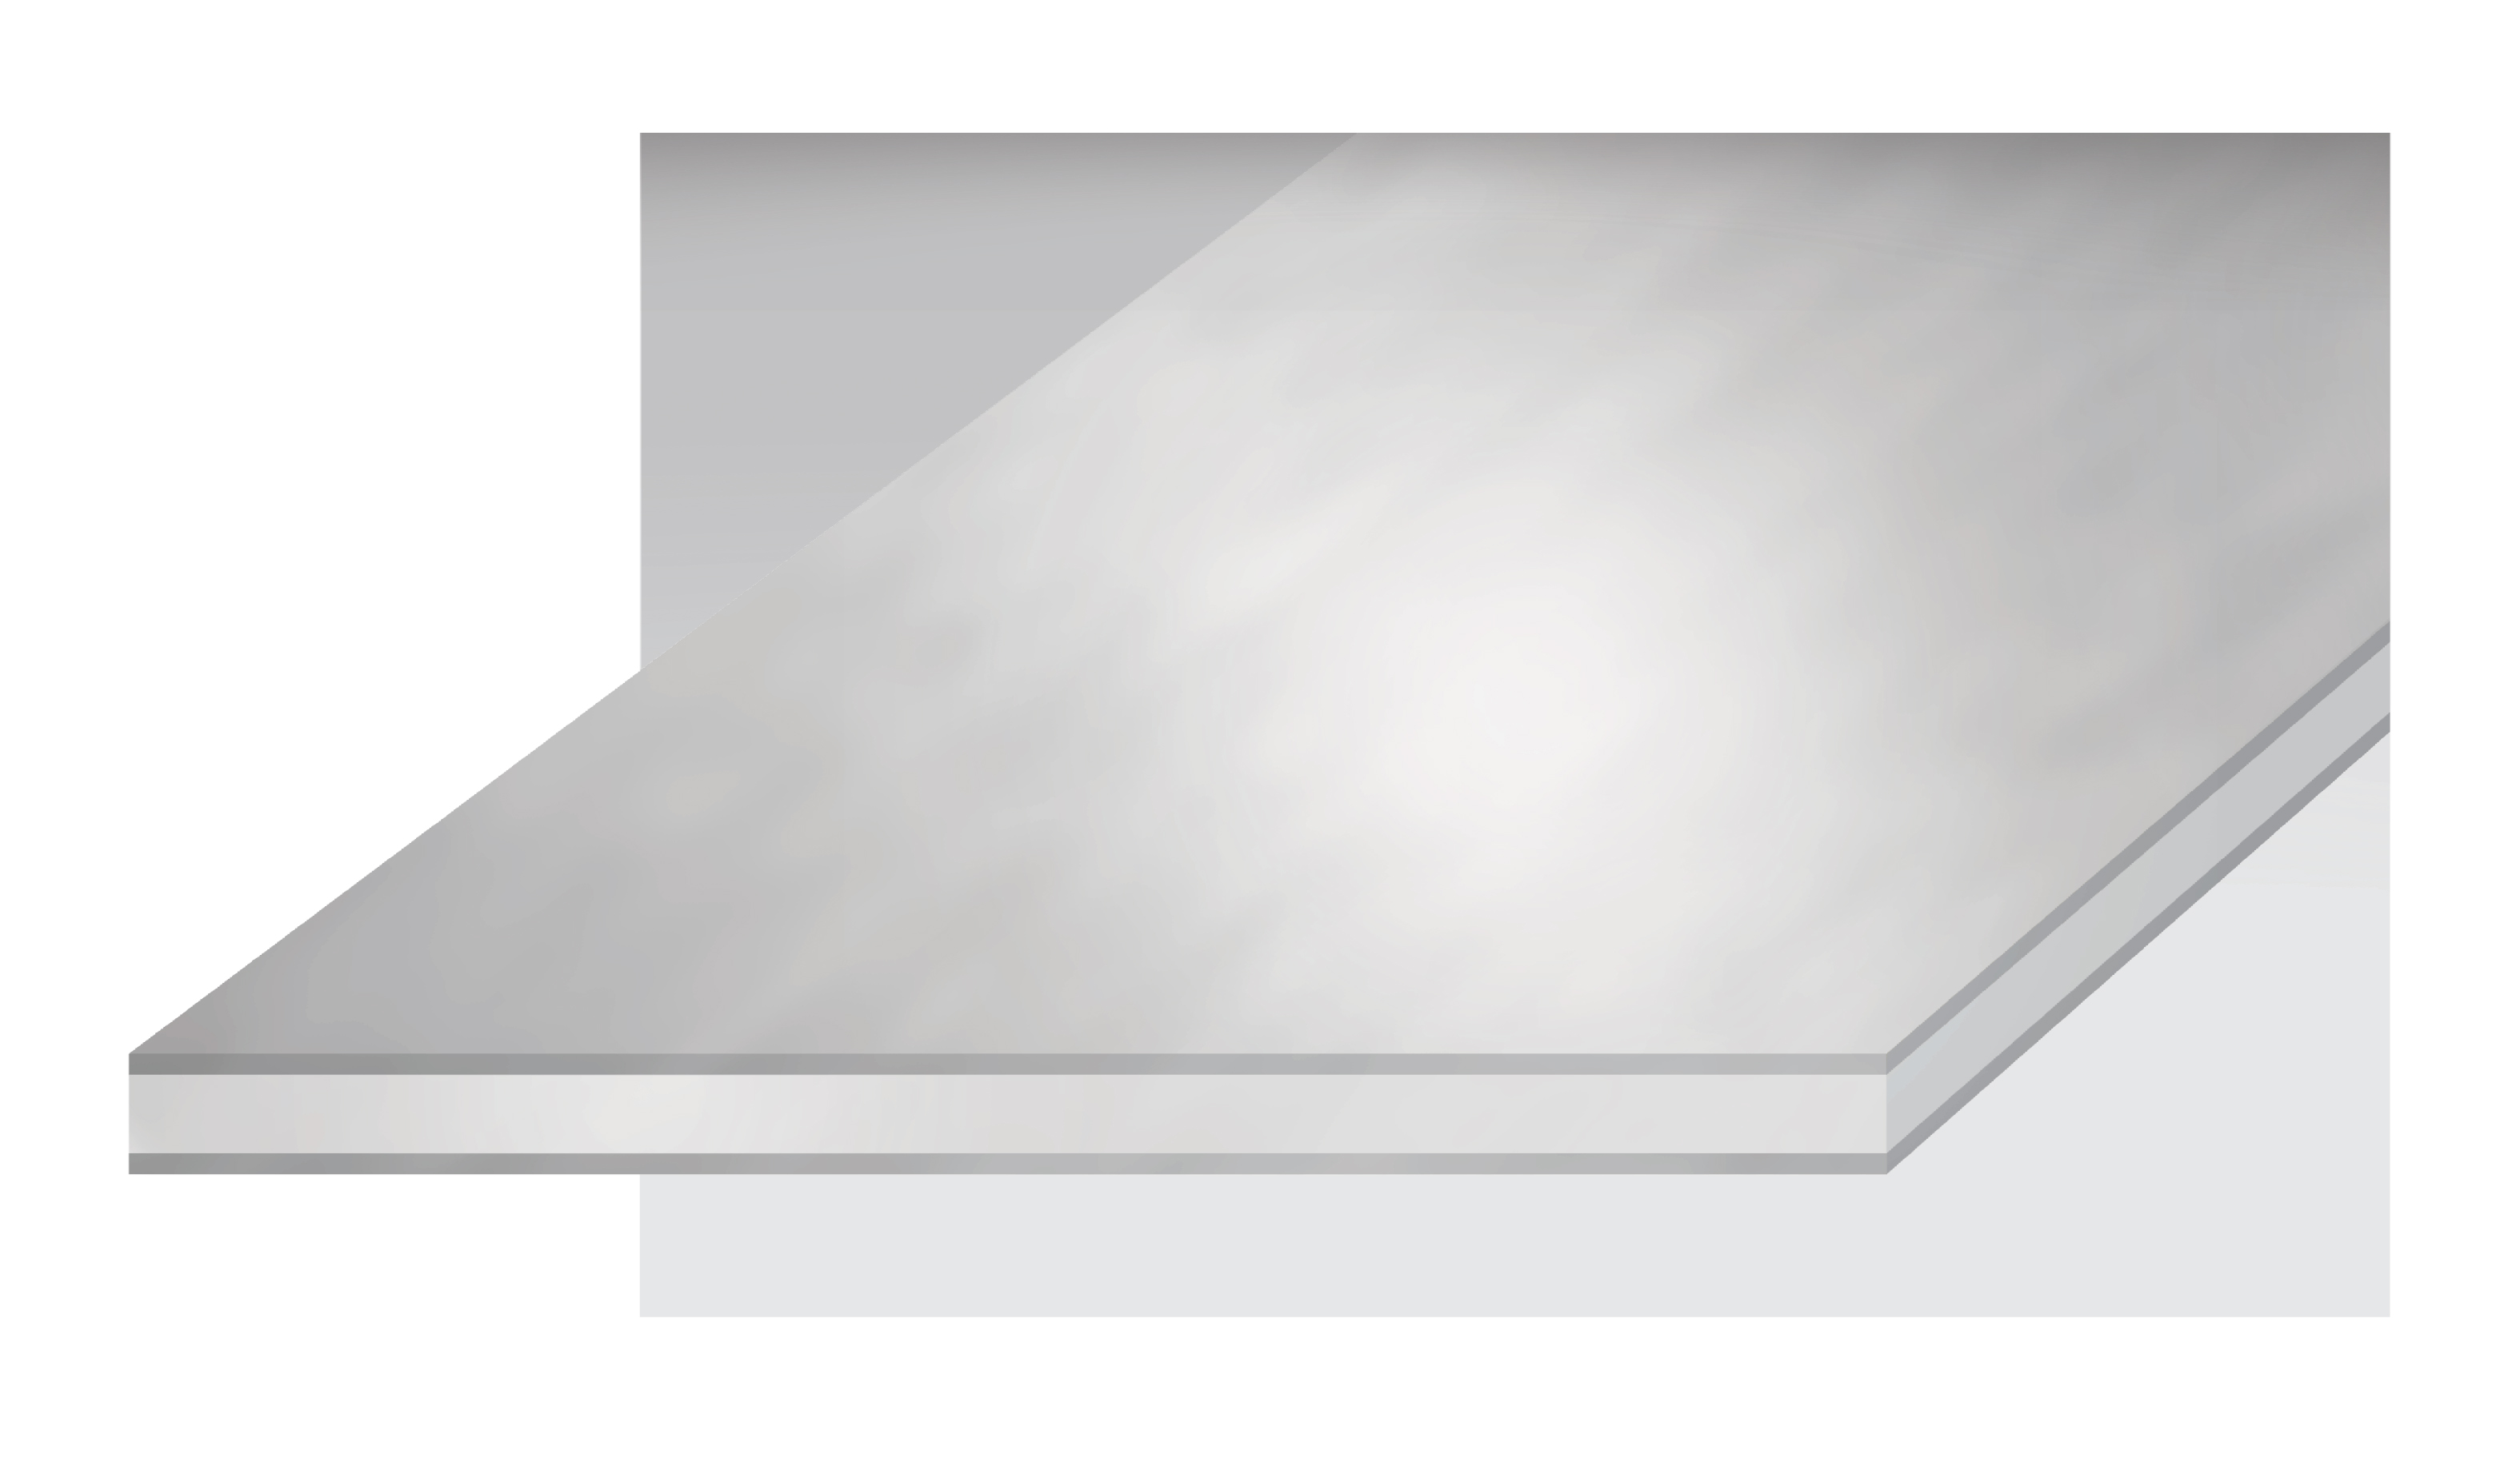 Illustration of eStainless clad material with aluminum